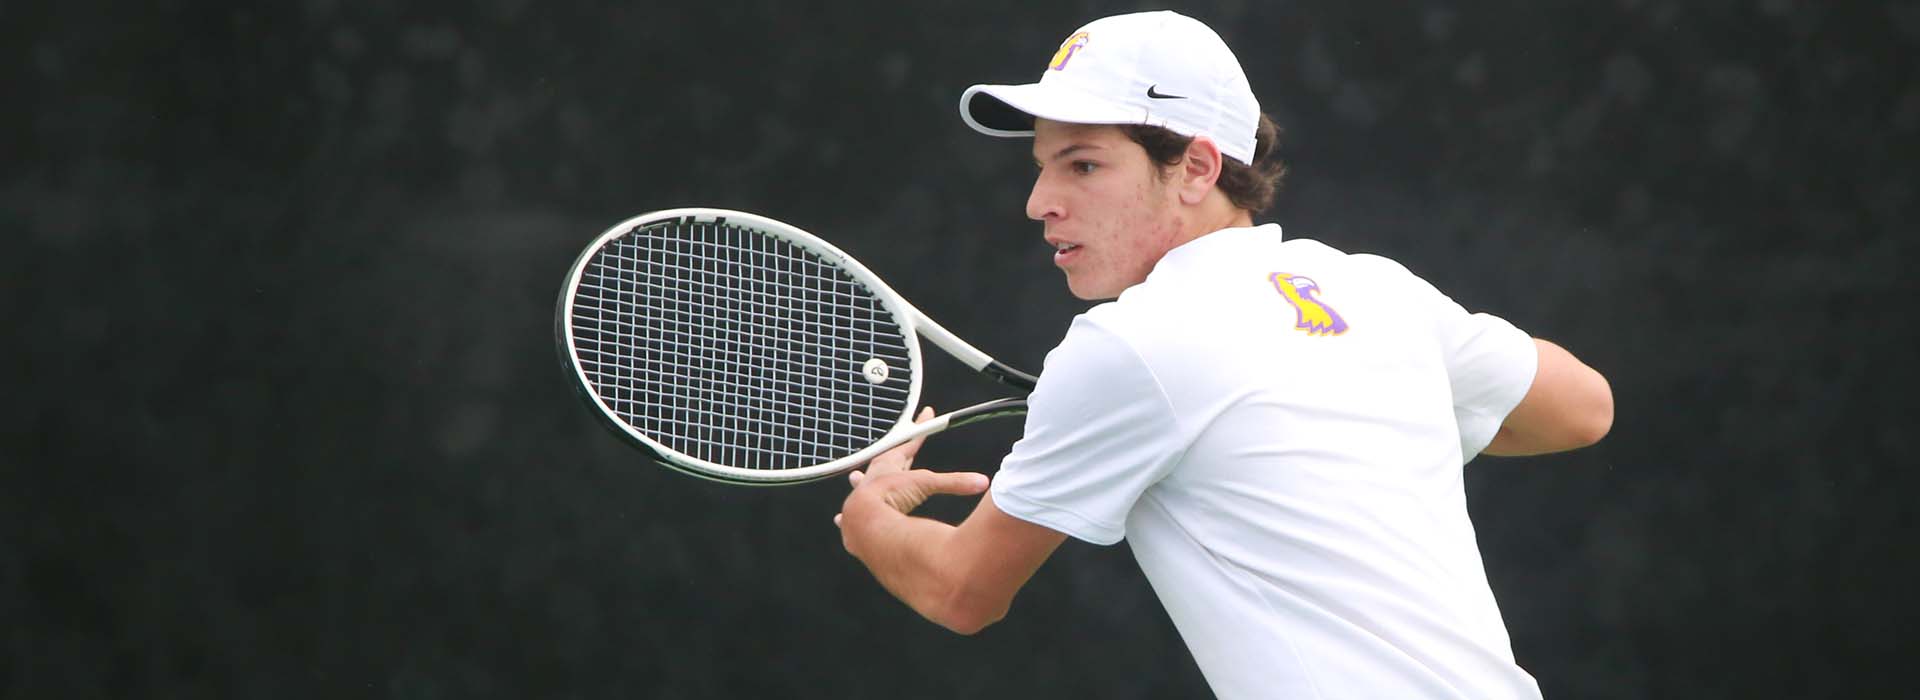 Golden Eagles conclude Belmont Fall Invitational with impressive singles performance against Lipscomb